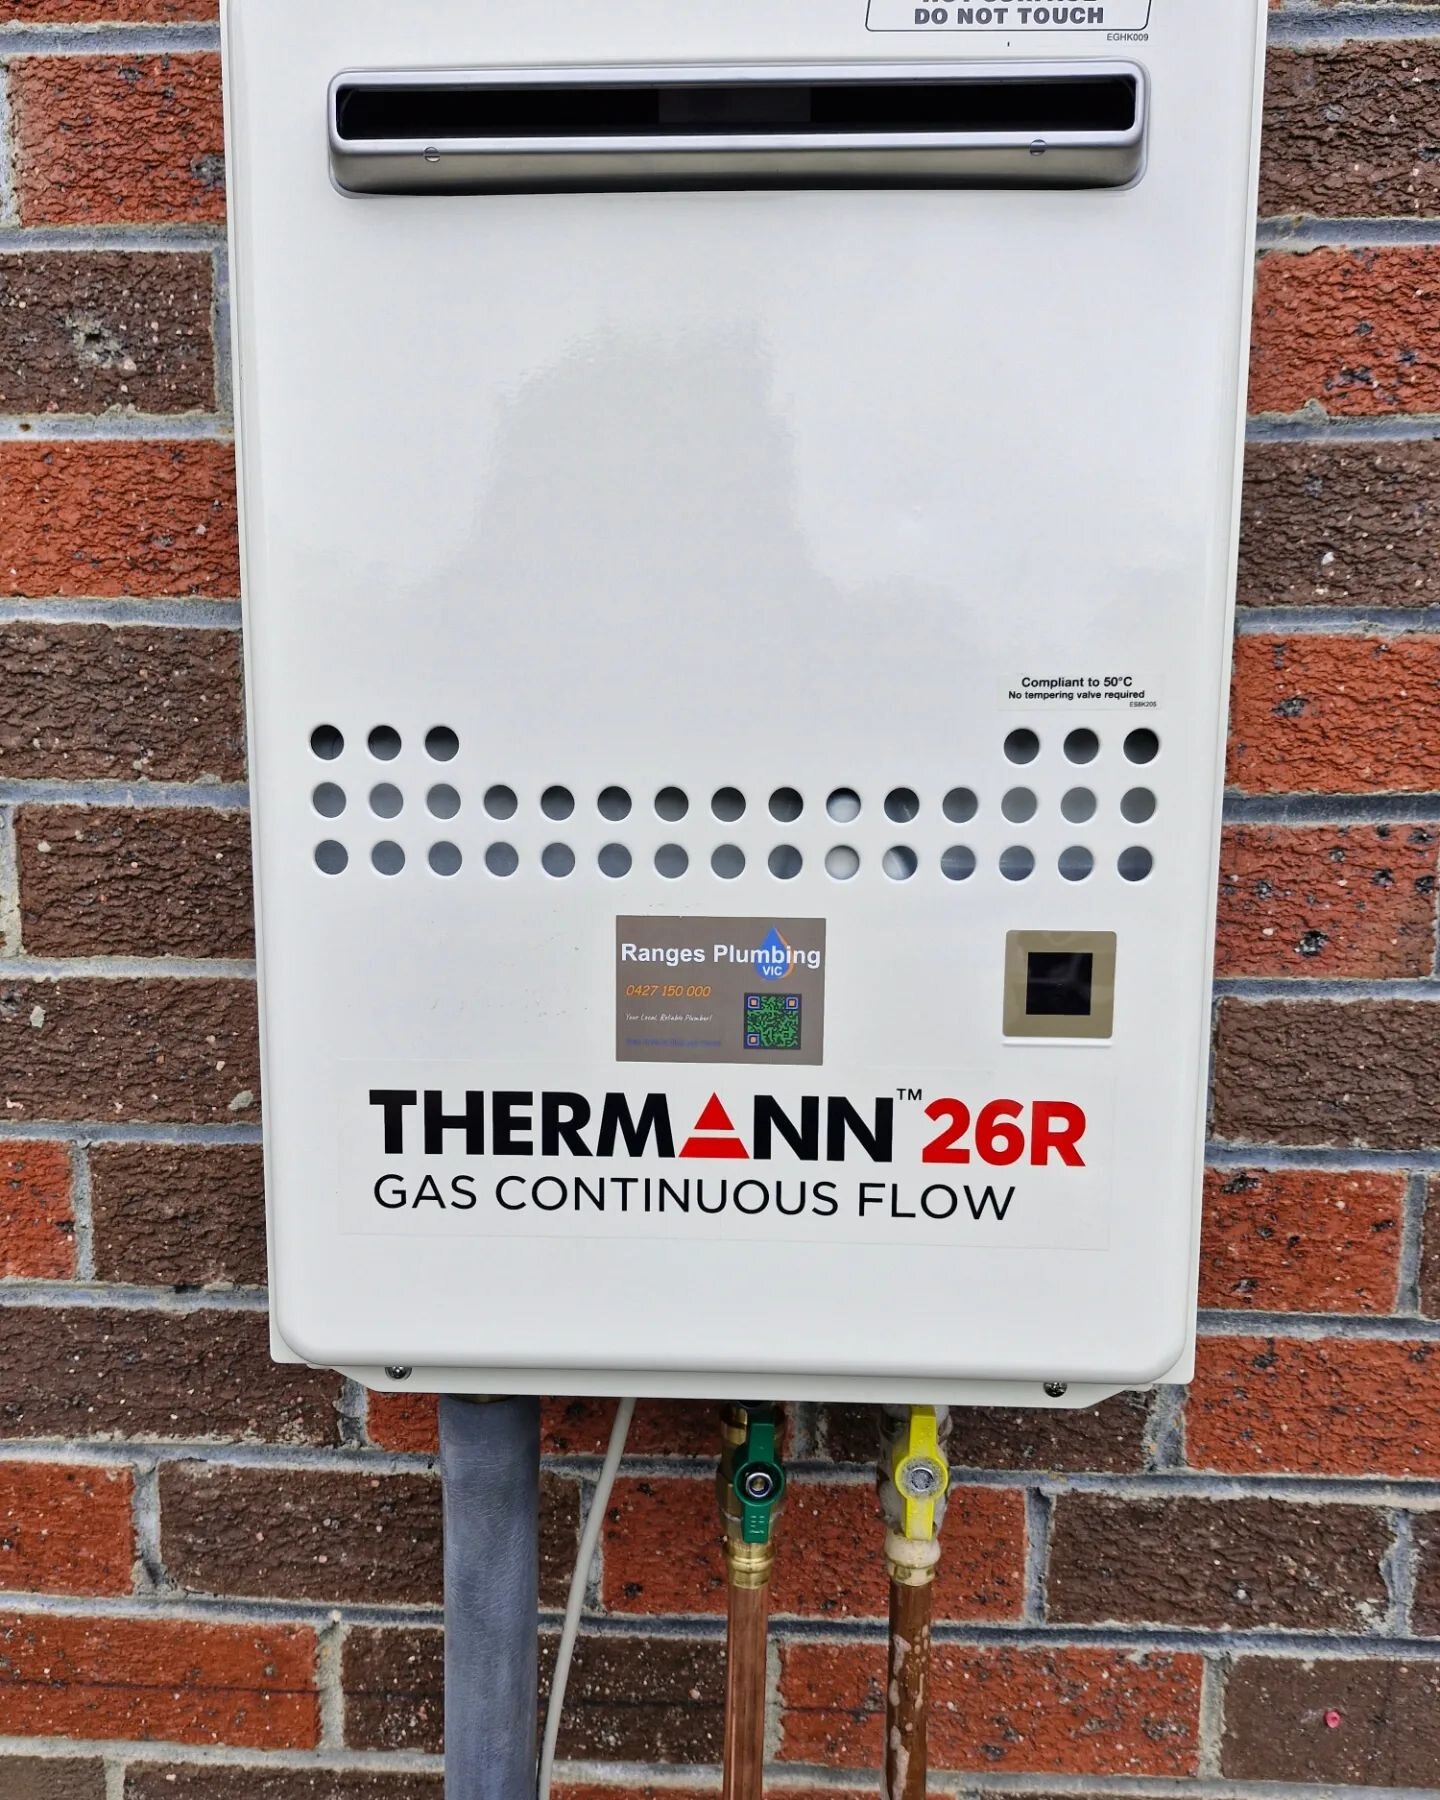 Fresh Thermann 26R we installed this morning in Monbulk! 

Replacing a twin heat pump setup, with a hot water unit that will actually provide consistent and reliable hot water, on demand.

These ' R 'Model Thermann units are fantastic for upgrading e